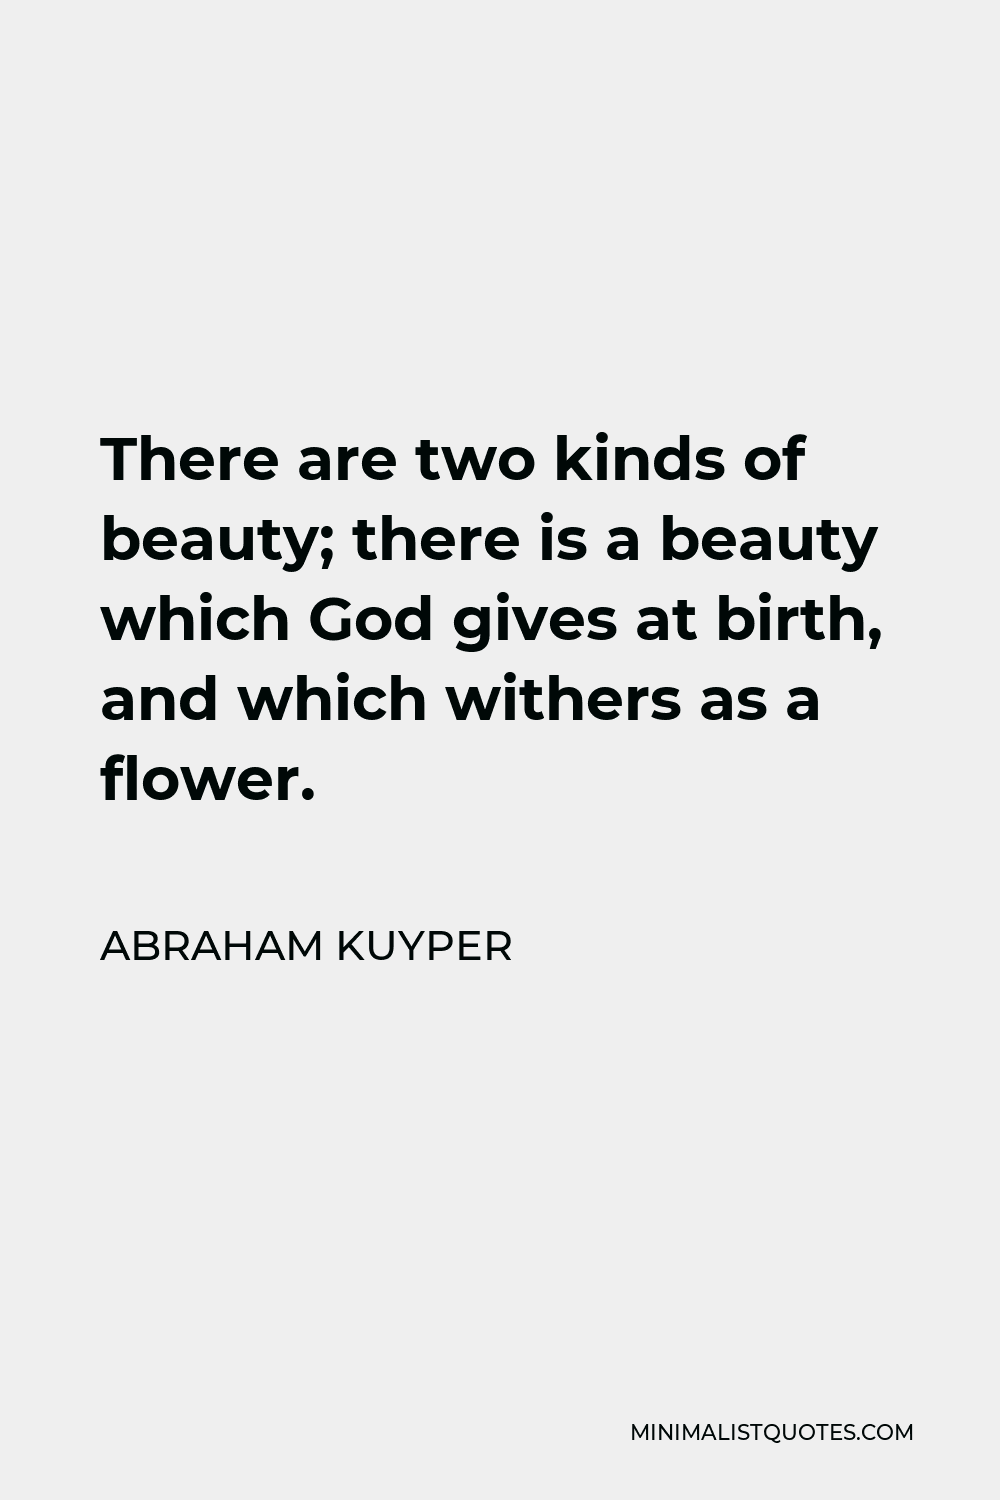 Abraham Kuyper Quote - There are two kinds of beauty; there is a beauty which God gives at birth, and which withers as a flower.